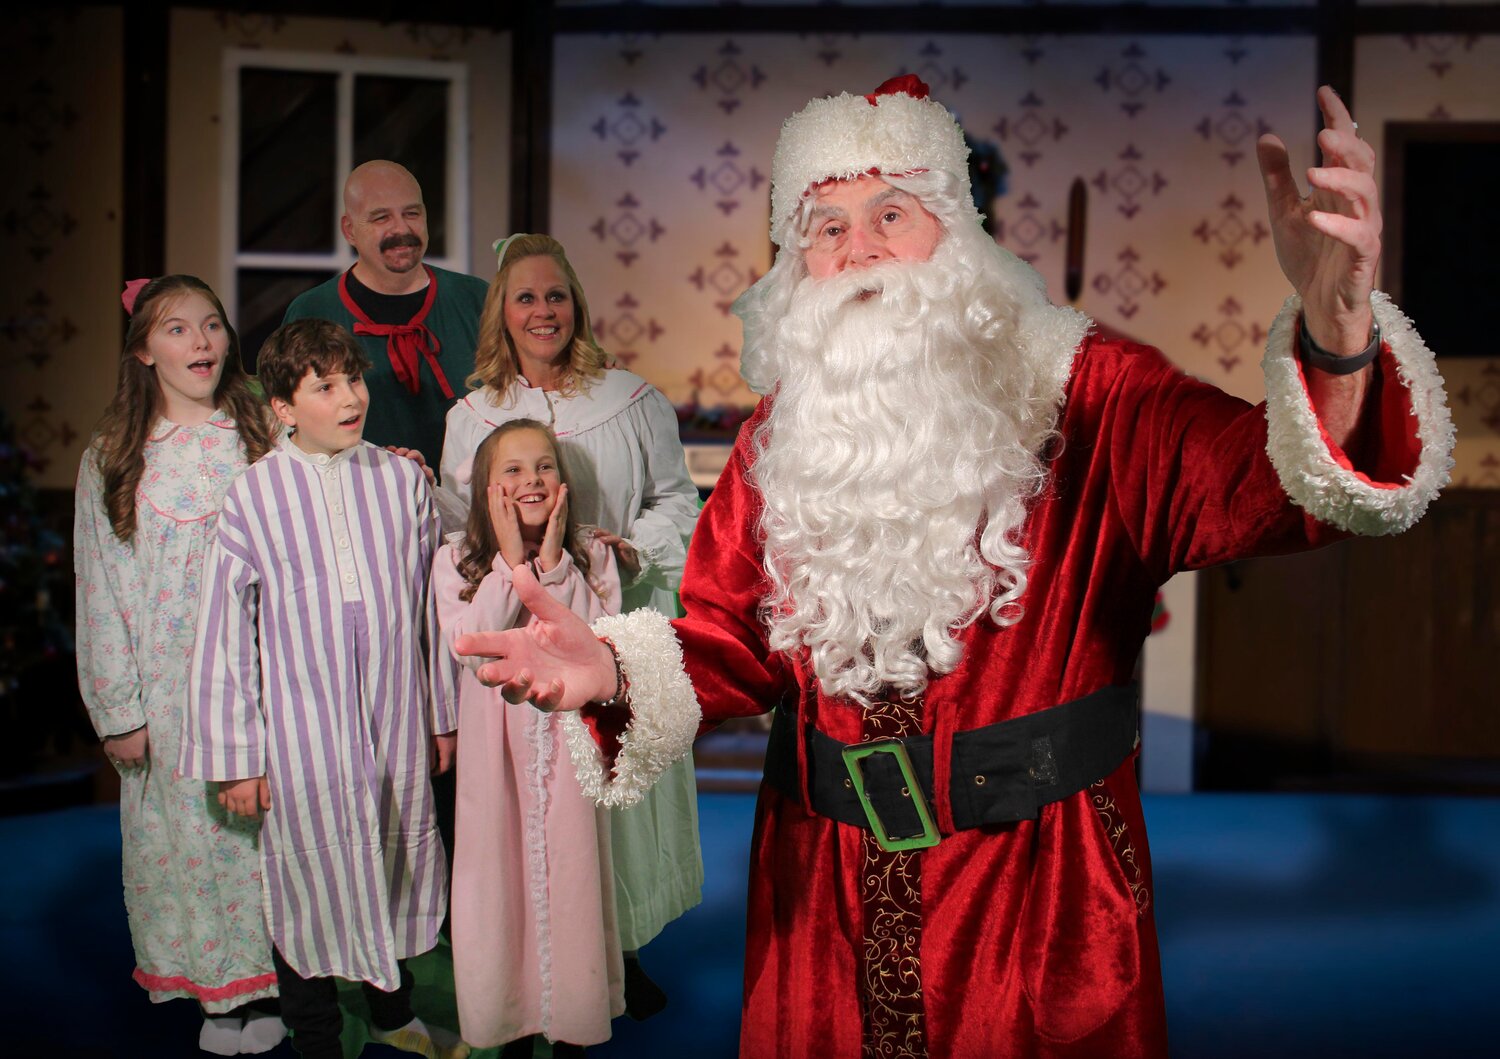 The classic poem “Twas the Night Before Christmas” comes to life on the stage of Mercer County Community College’s Kelsey Theatre in West Windsor, N.J., for five shows, Dec. 8-10.